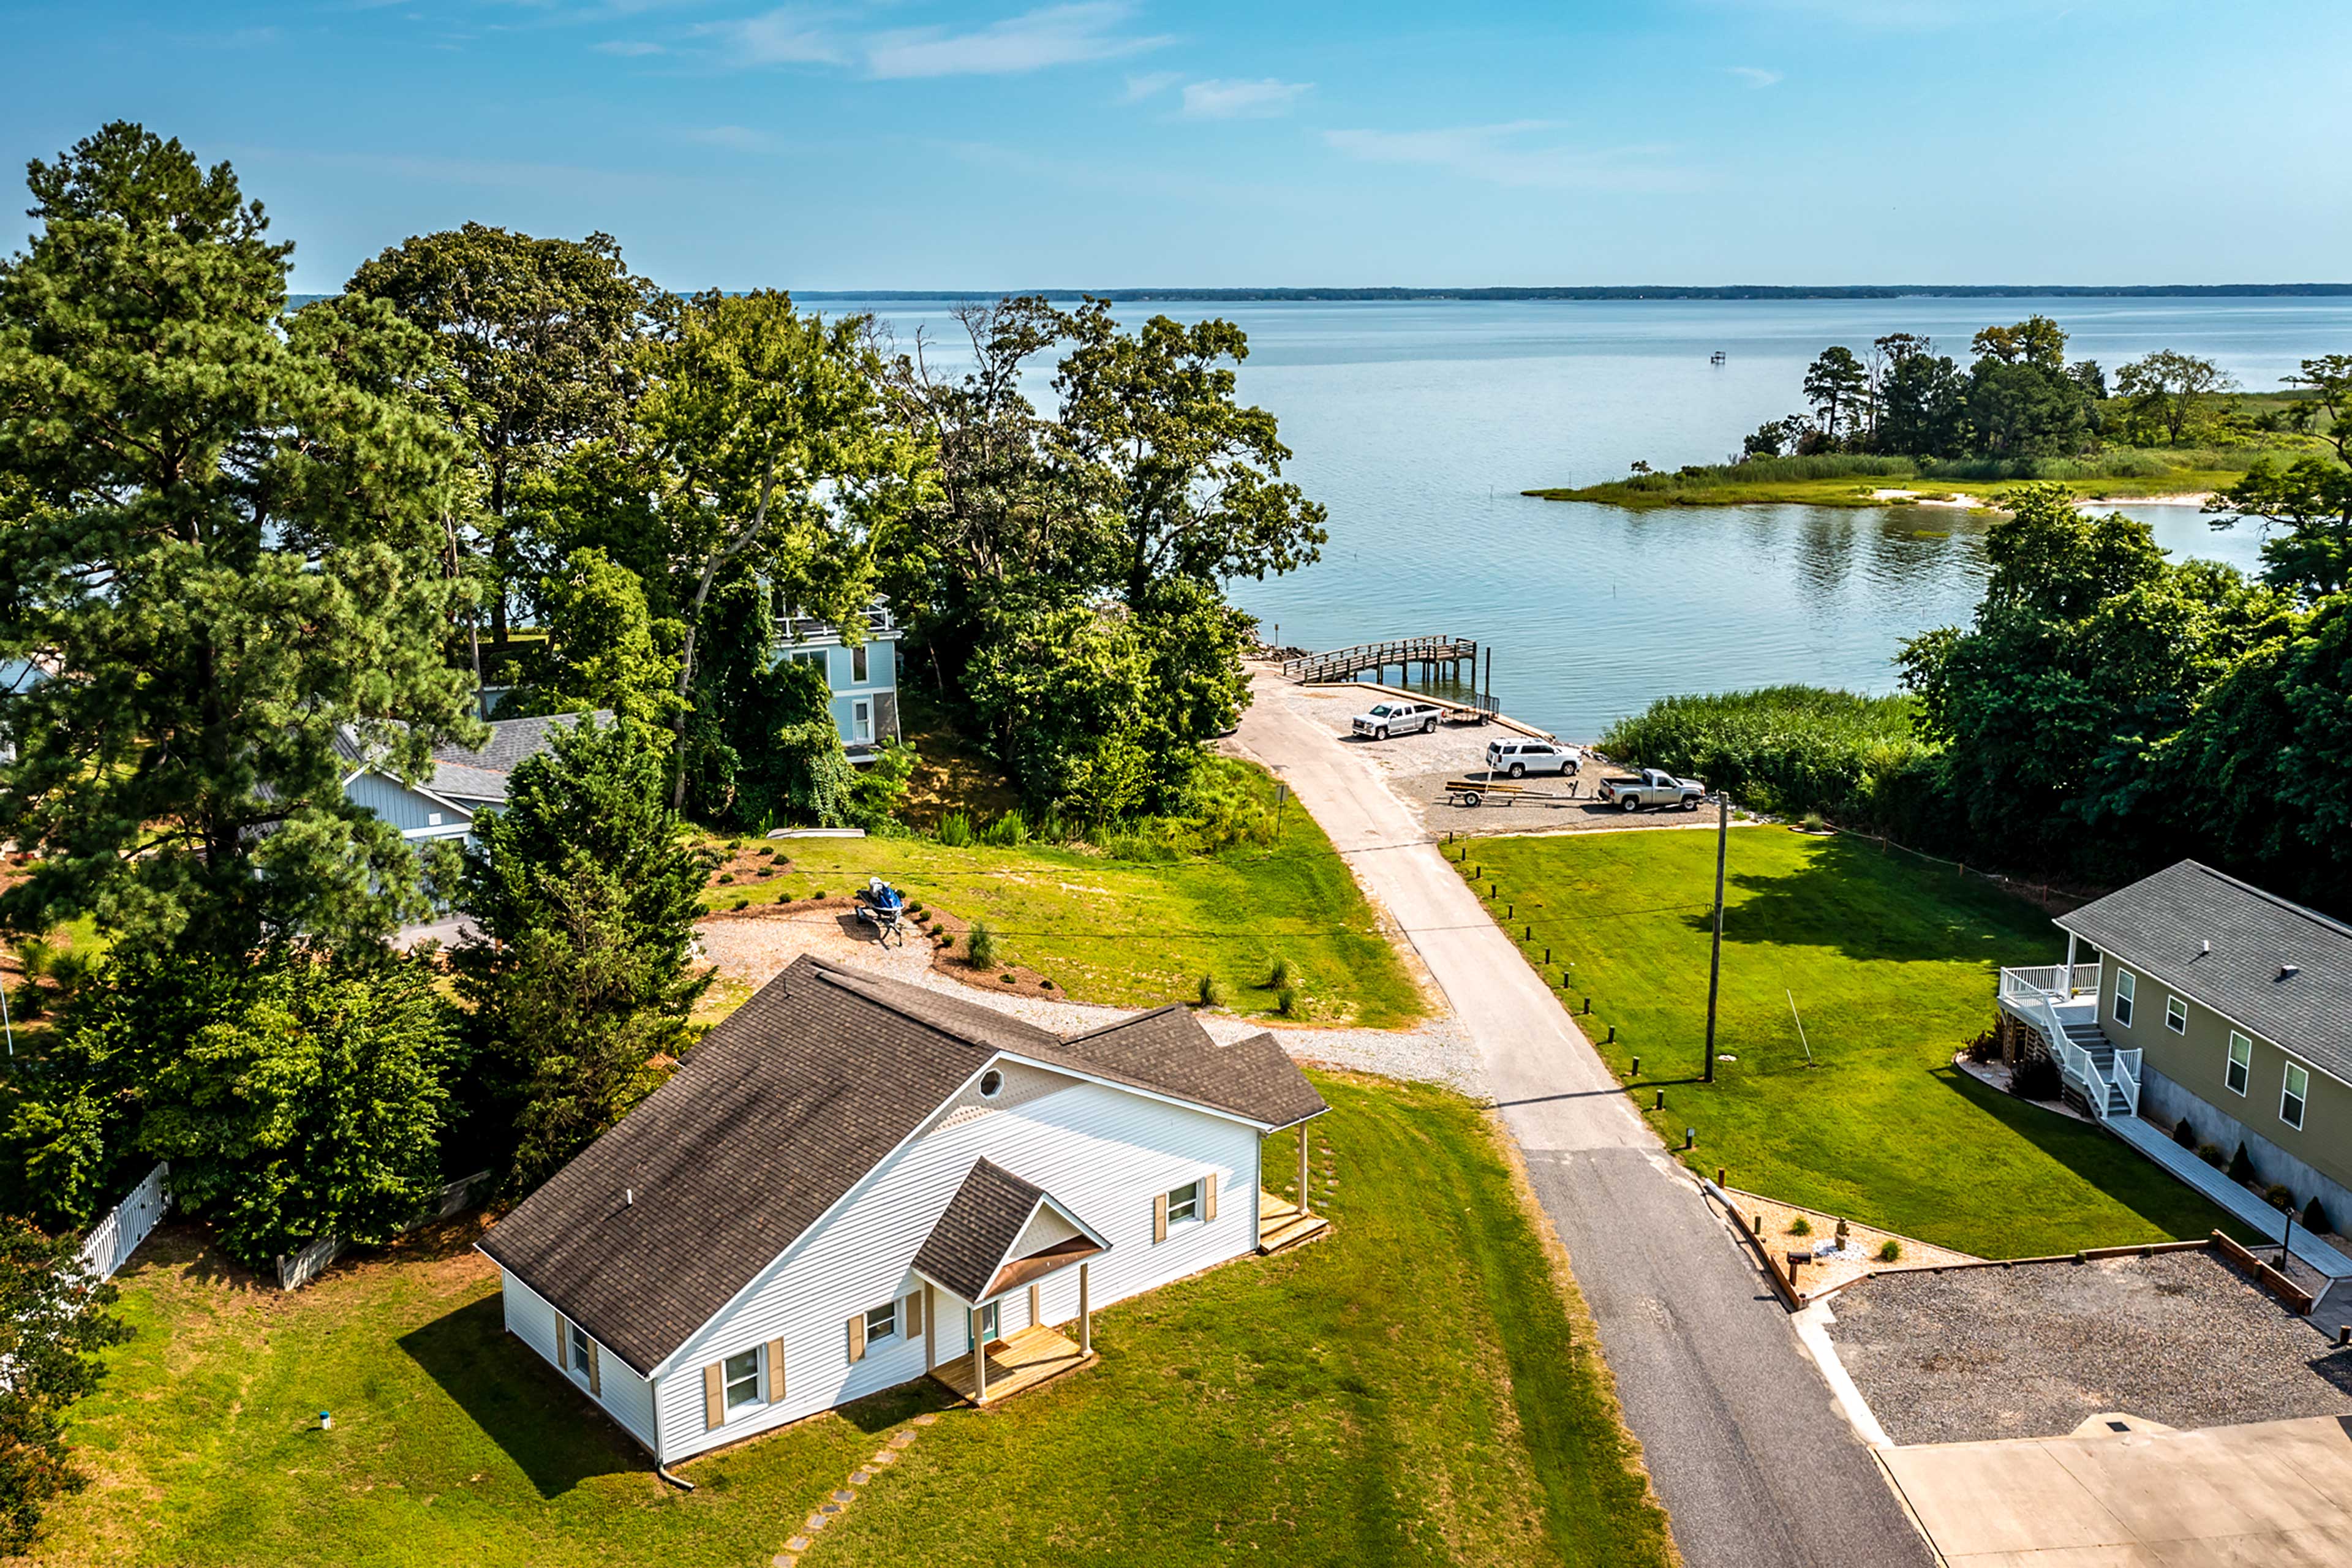 Property Image 1 - Chesapeake Bay Home: 200 Ft to Boat & Fish!